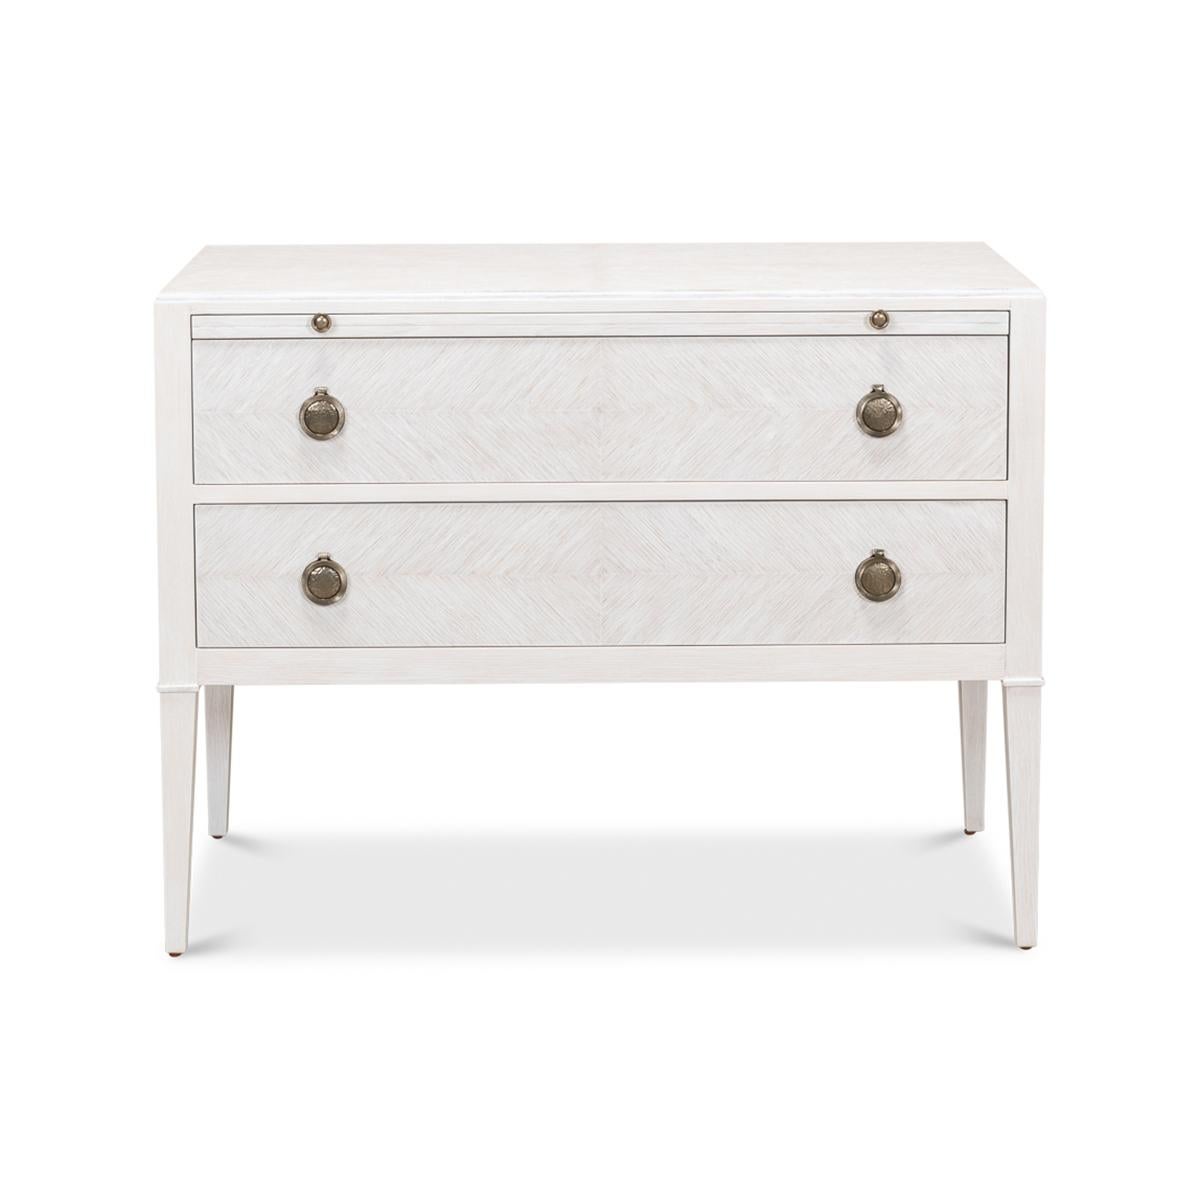 In the French Louis XVI style, the Transitional Painted Oak Dresser has a herringbone pattern in a white wash finish, with a long dressing slide above two long drawers, with brass hardware and raised on square tapered legs. 

Dimensions: 38